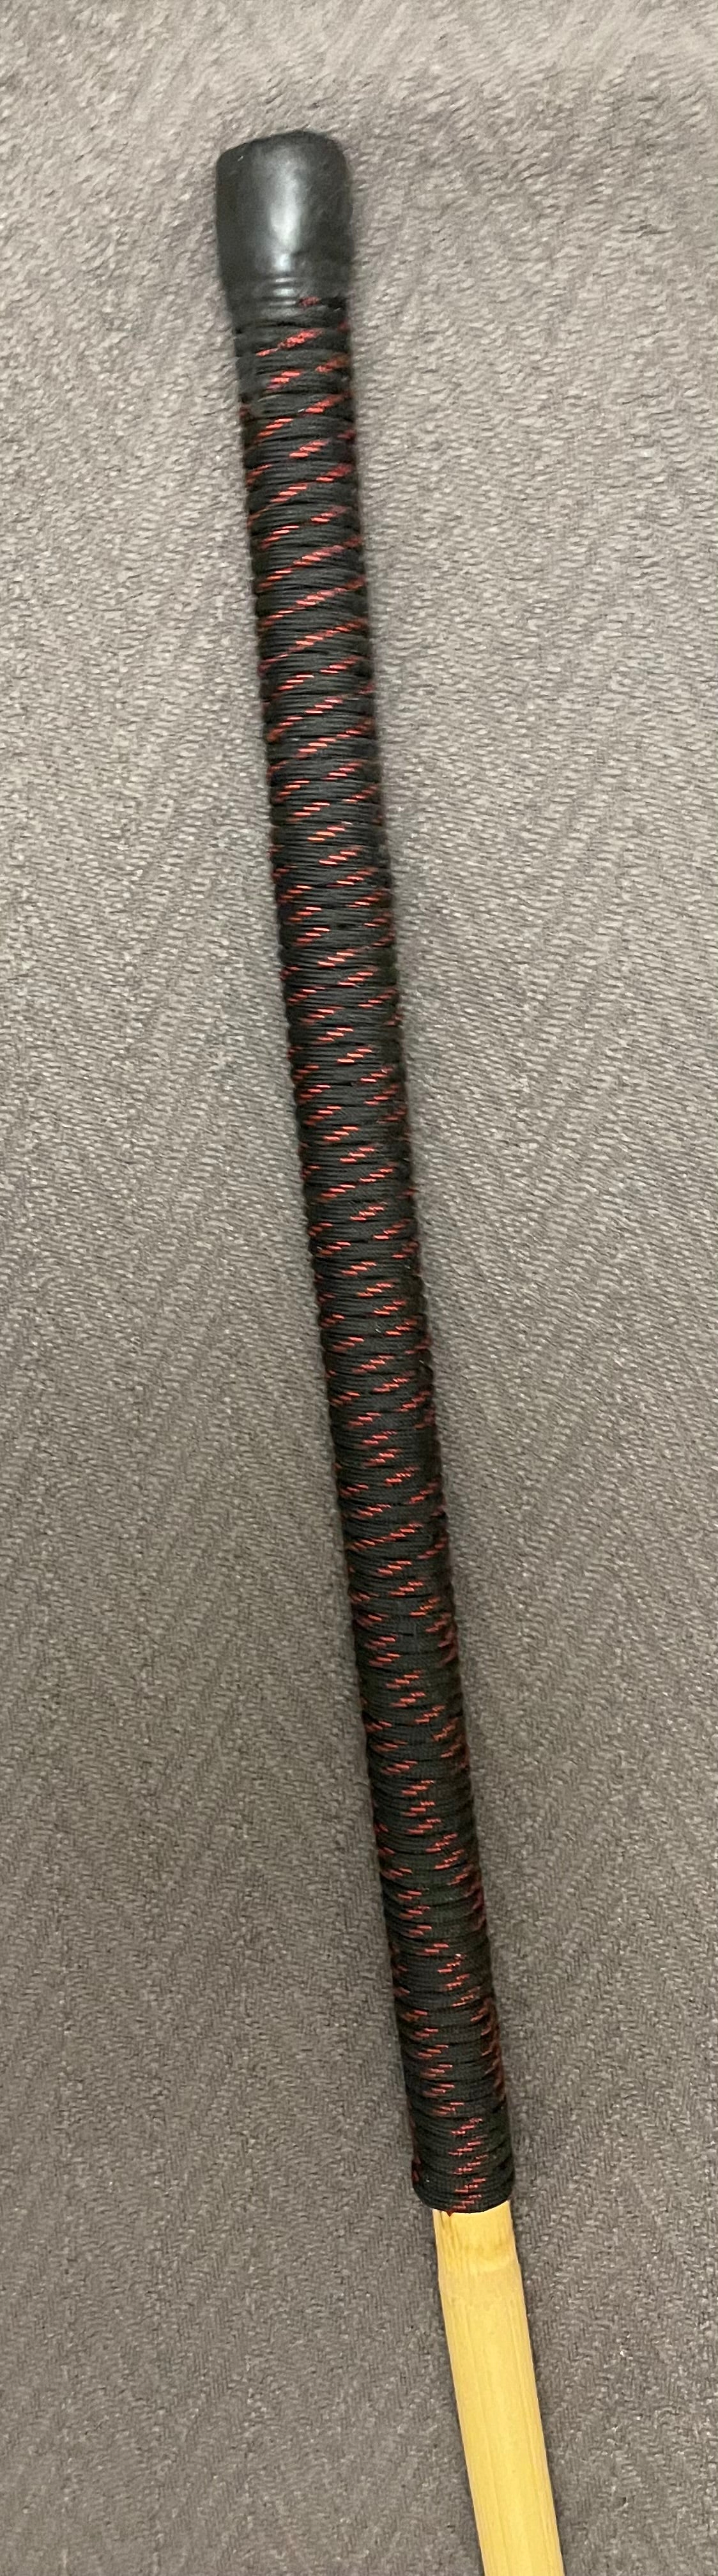 Singapore Prison Cane -  Standard and Extreme Editions - Judicial Rattan Cane (Malacca Rattan) - 1.2m L & 12.5 - 14 or 15-16 mm D - 15” Paracord Handles